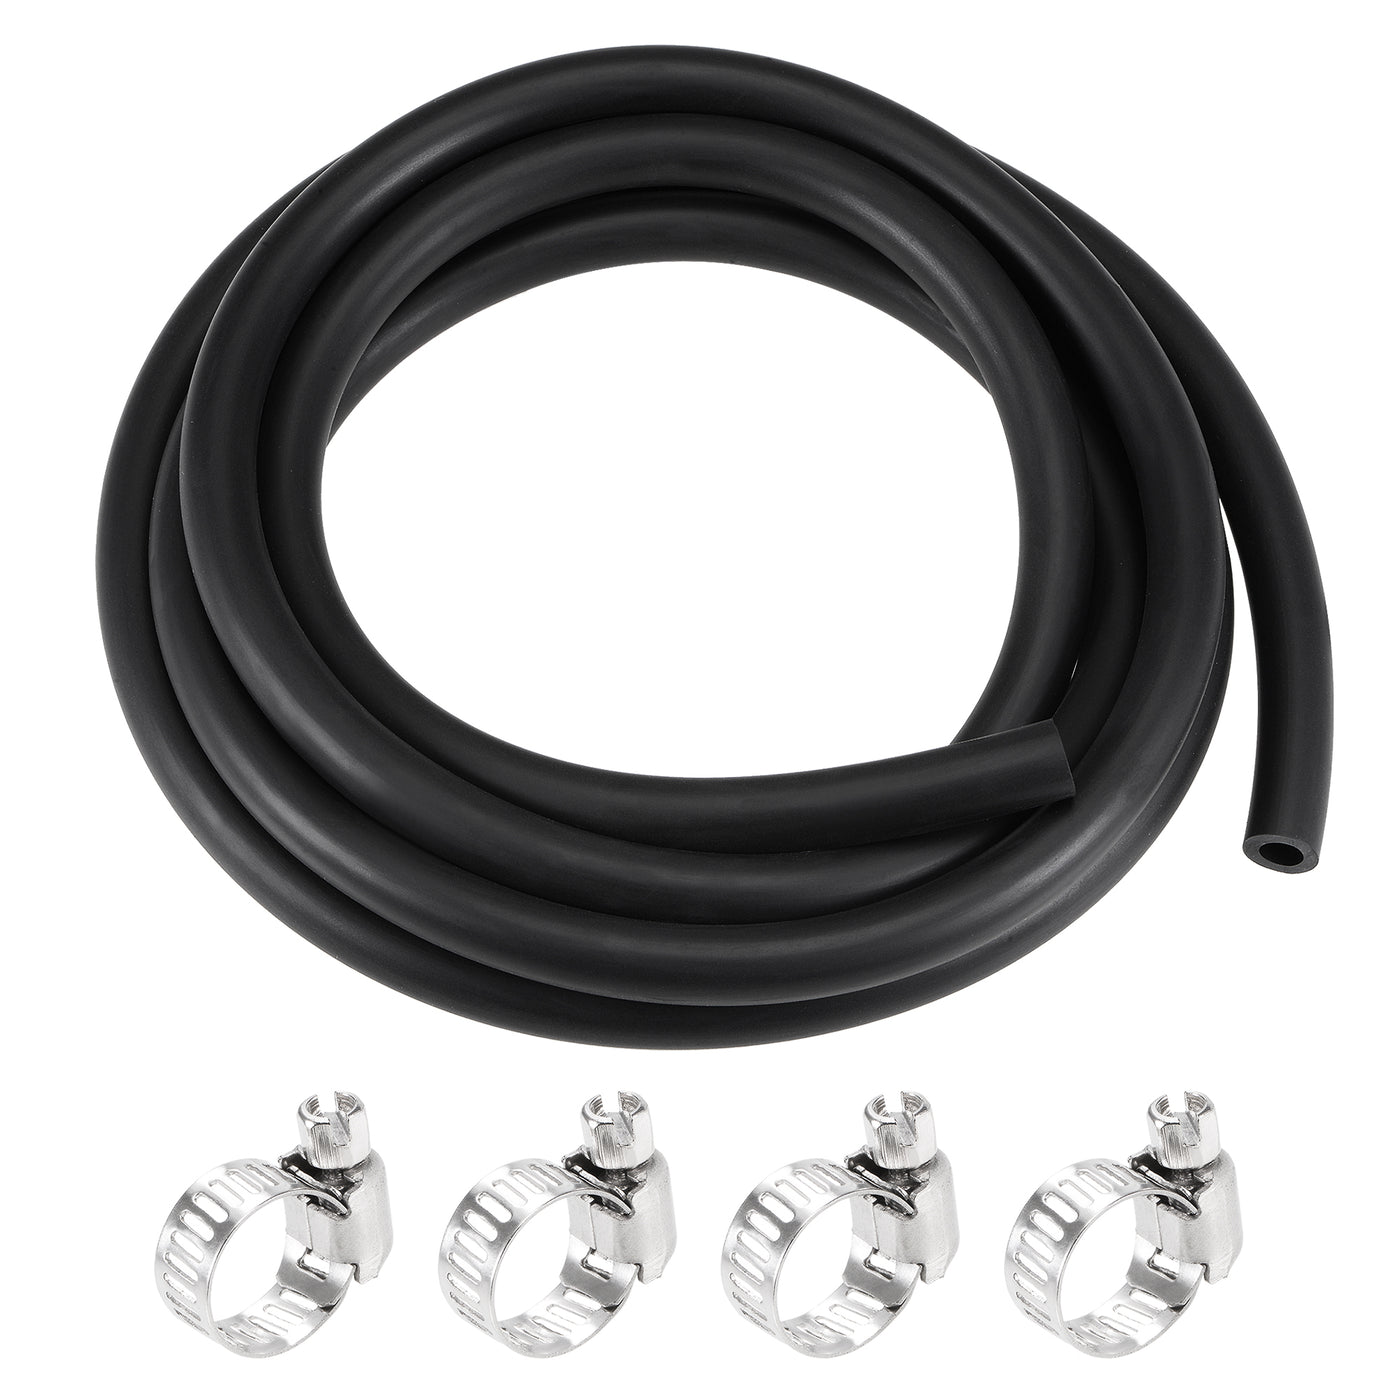 Uxcell Uxcell Fuel Line Hose 5mm ID 10mm OD 6.6ft Oil Line & Fuel Pipe Rubber Water Hose Black, 4 Clamps